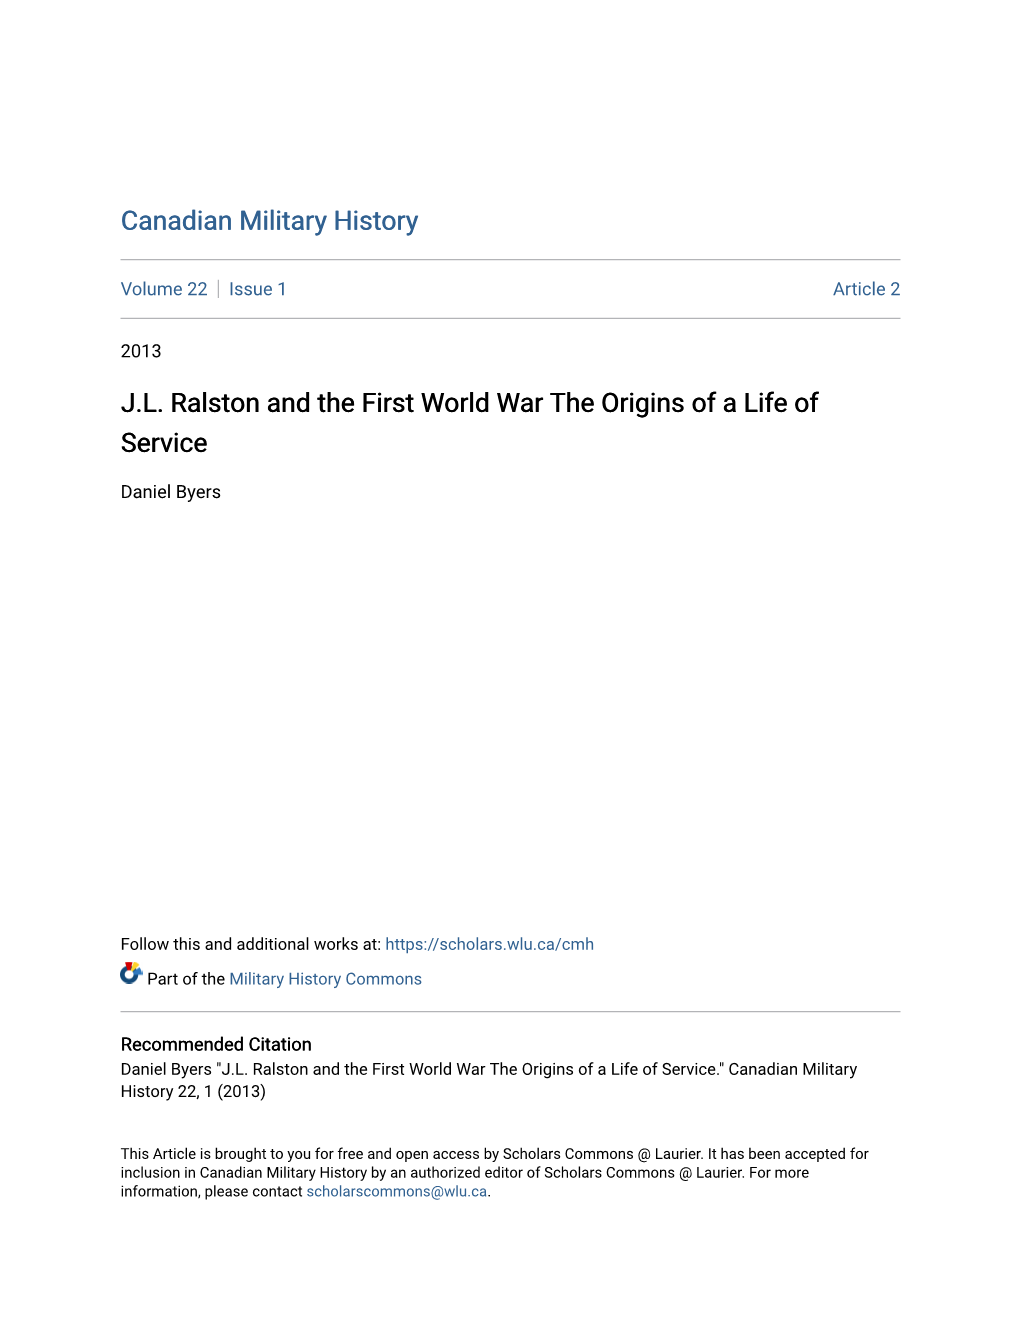 J.L. Ralston and the First World War the Origins of a Life of Service